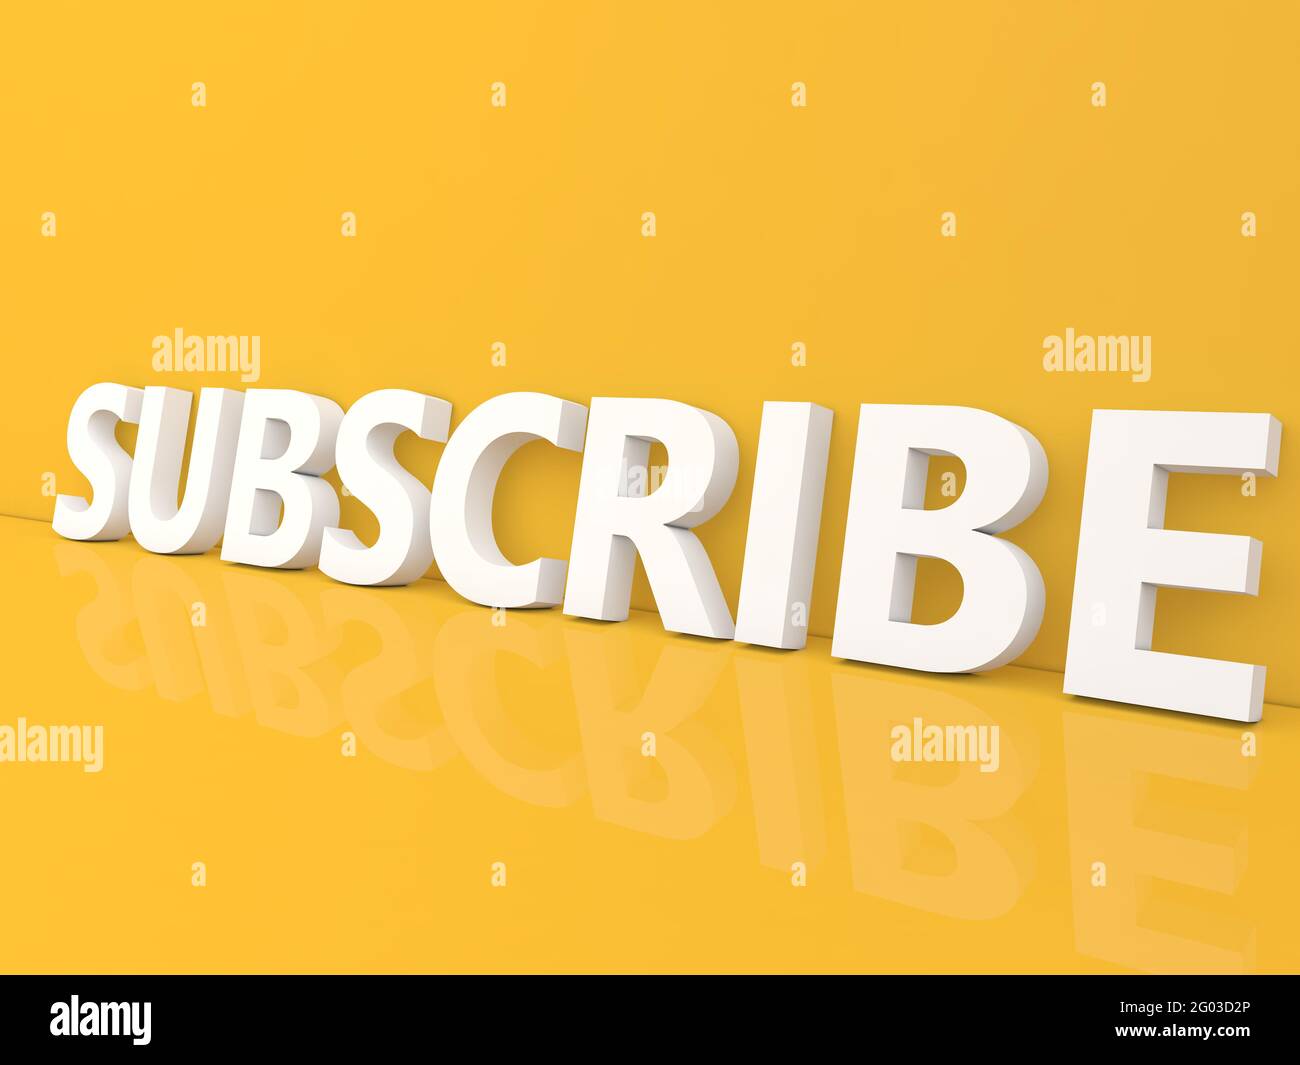 Inscription subscribe on a yellow background. 3d render illustration. Stock Photo